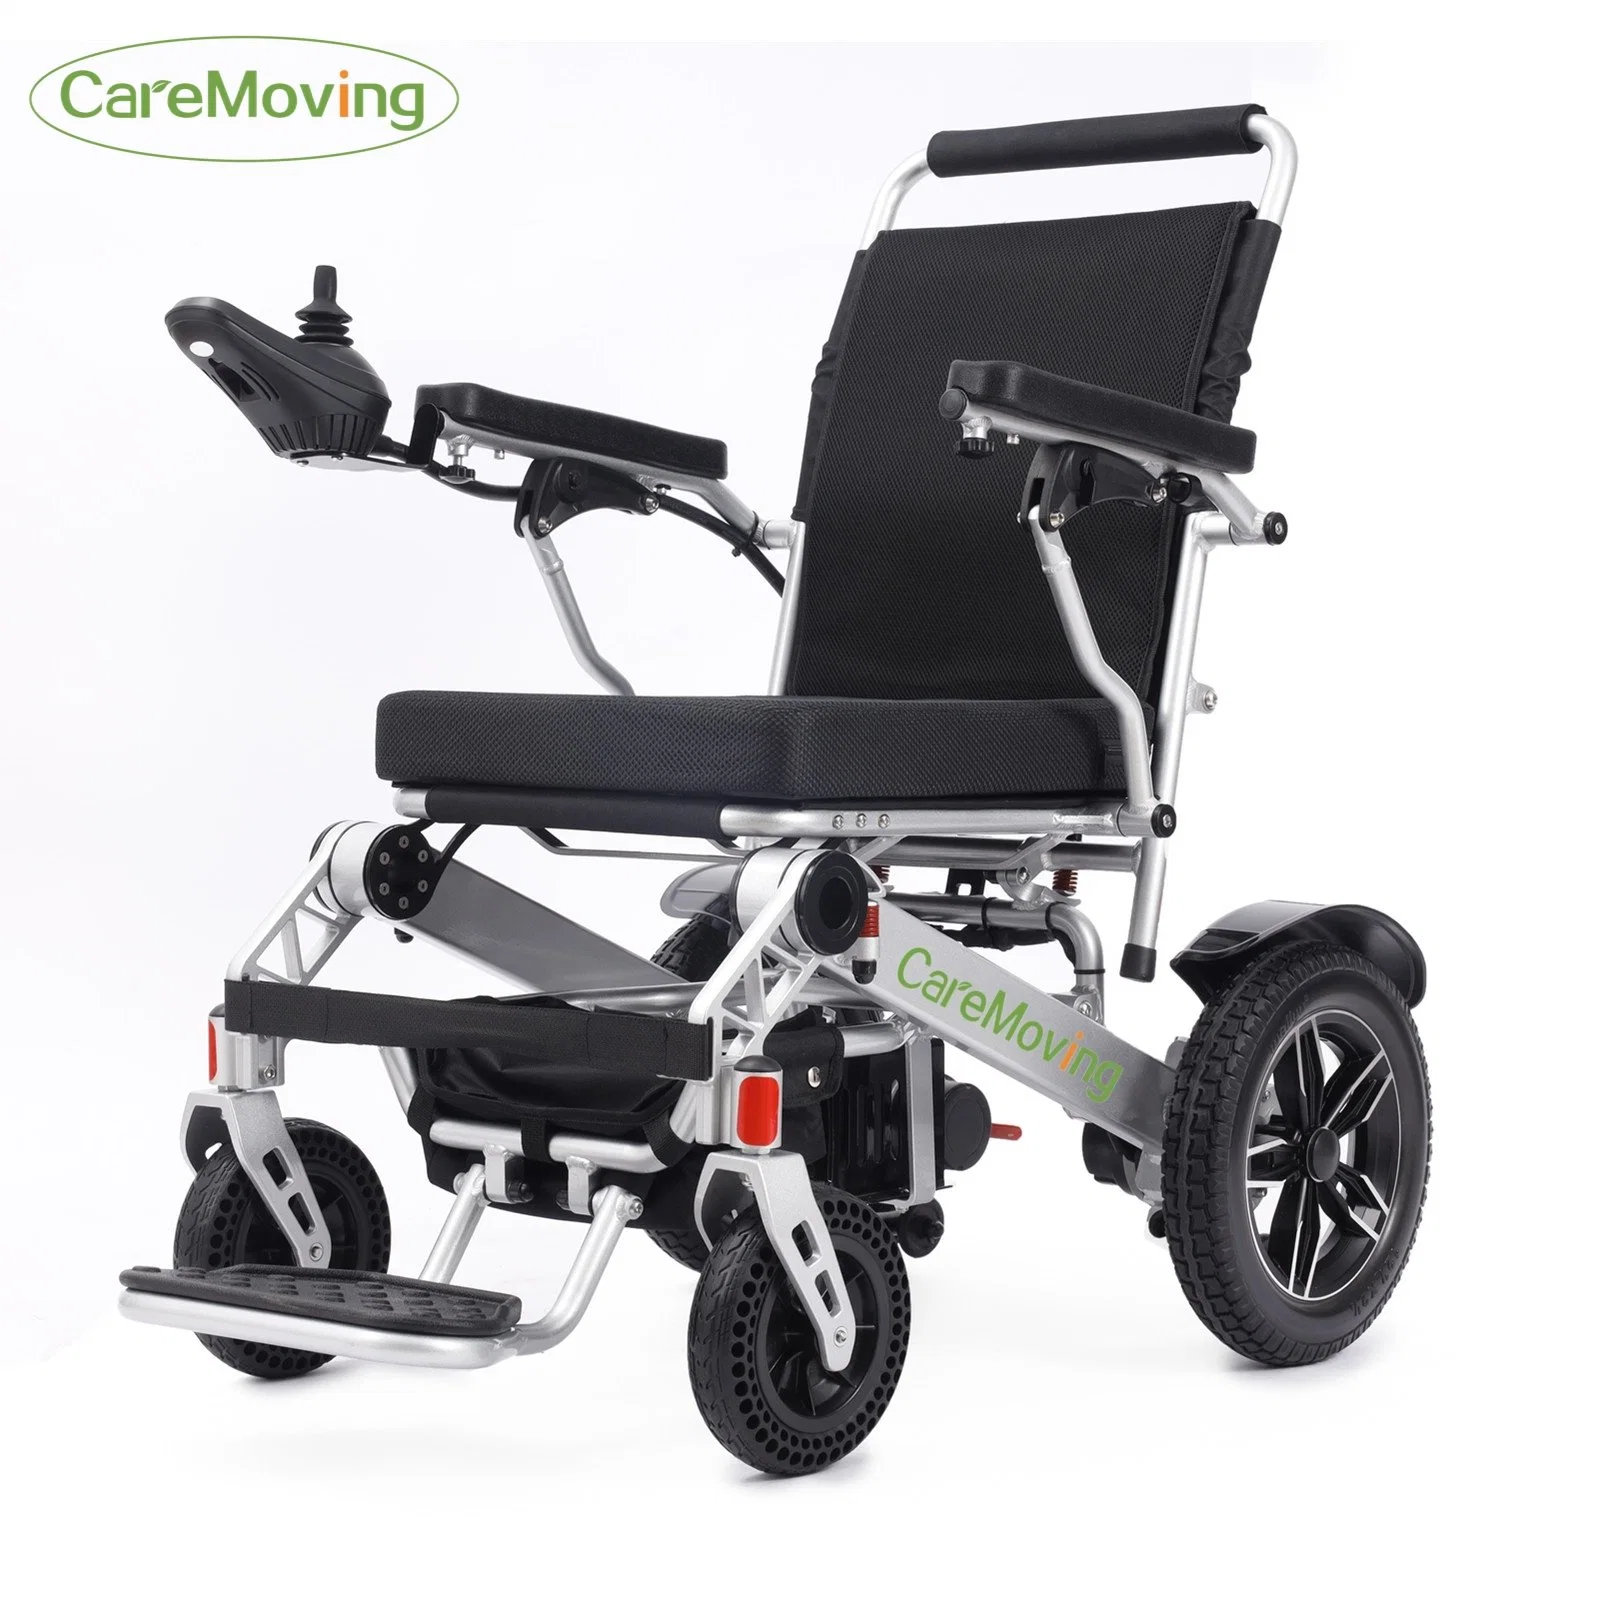 China Supplier Disabled Folding Power Mobility Wheel Chair Adult Aluminum Lightweight Electric Wheelchair with Lithium Battery